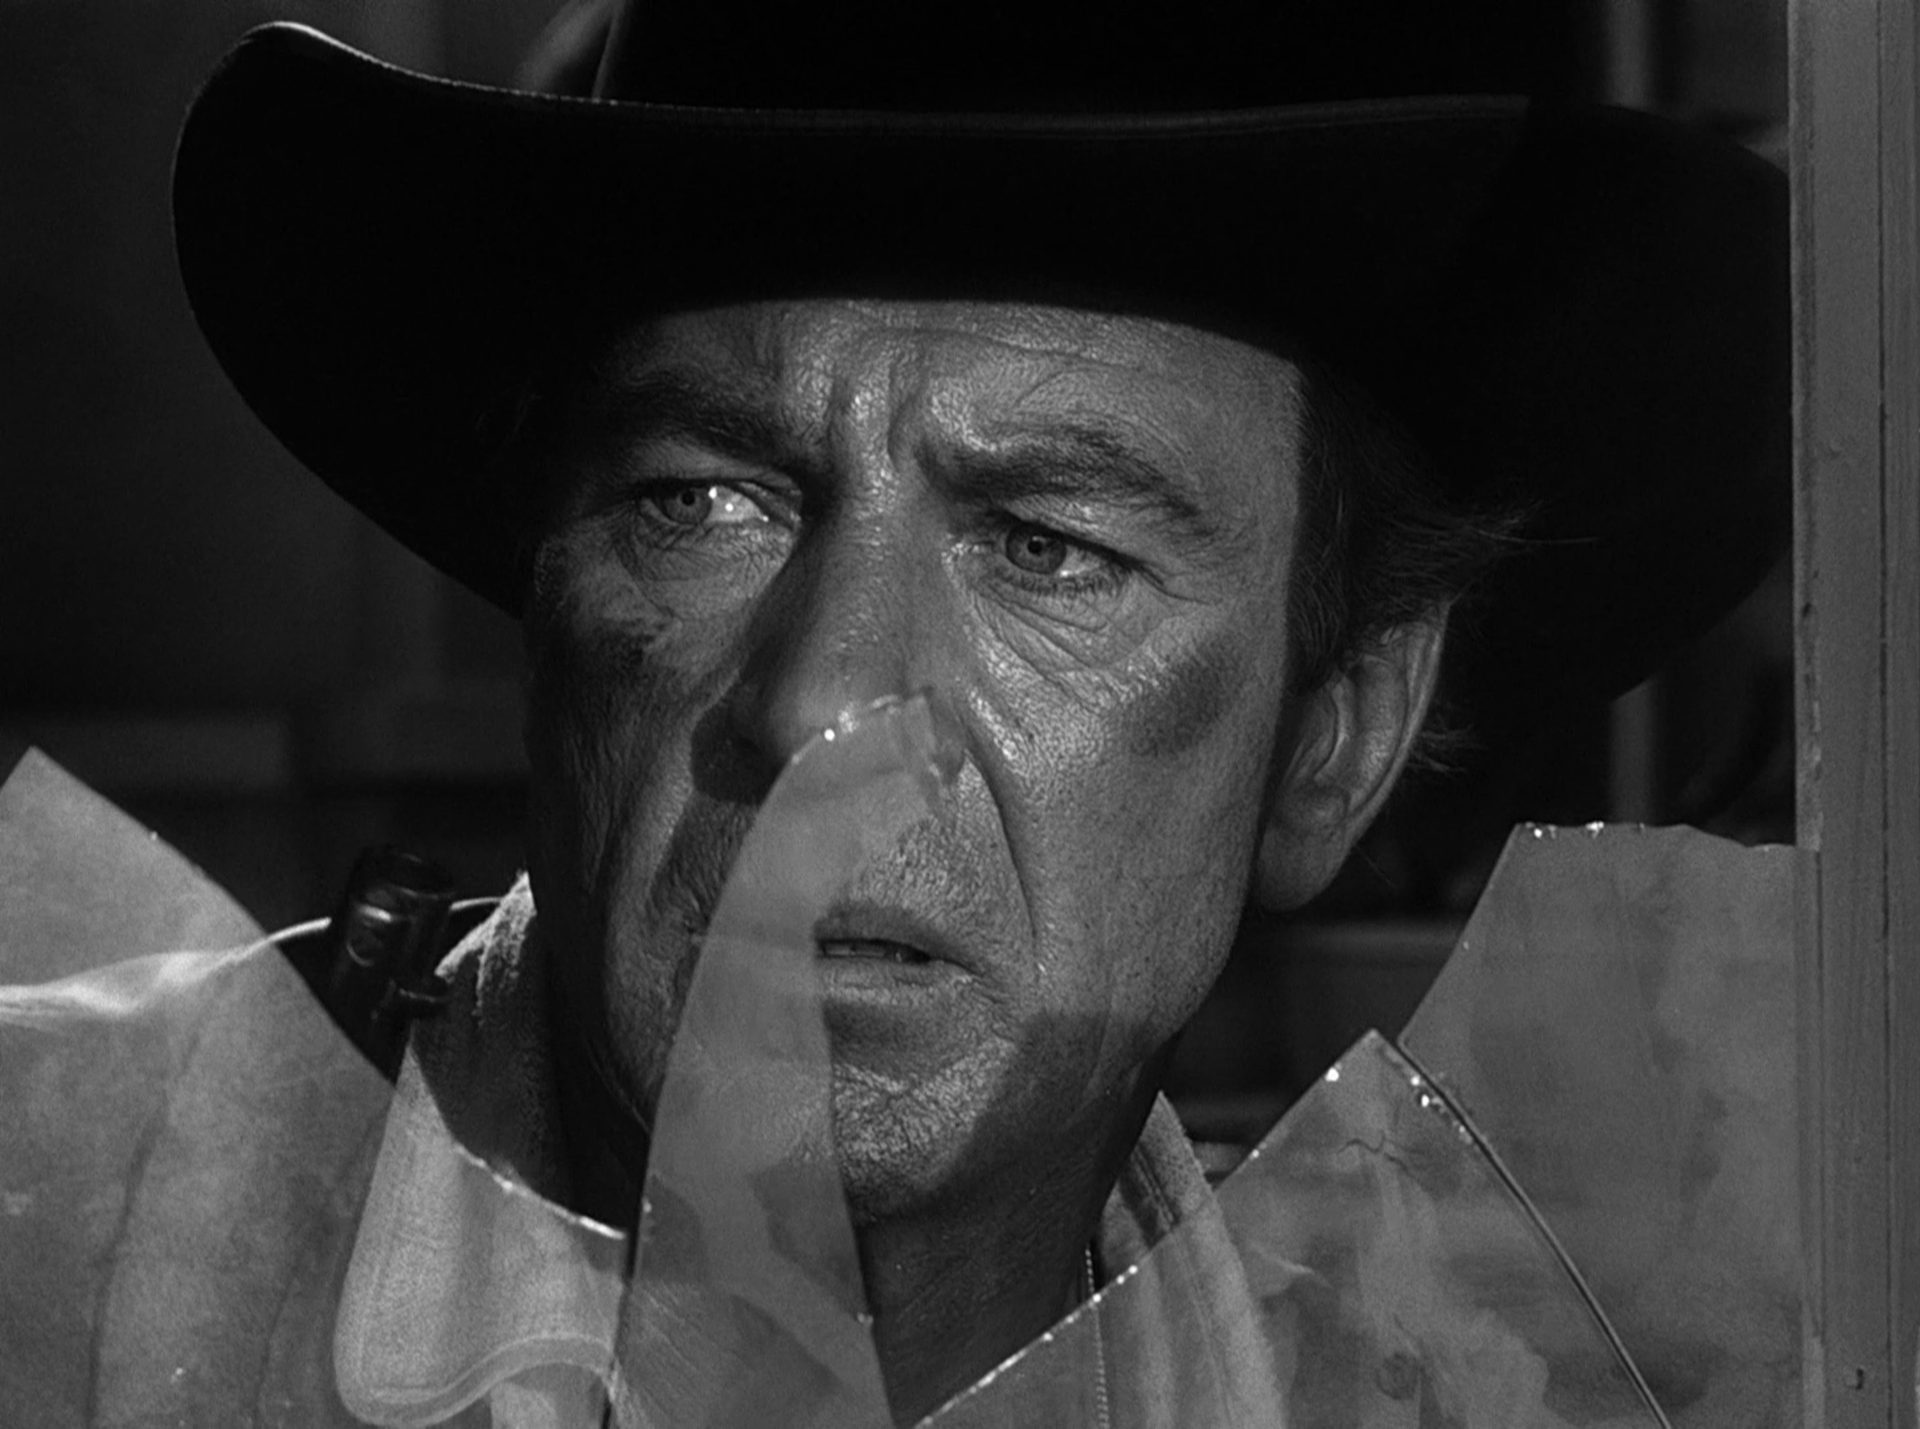 Close-up of Gary Cooper as Marshal Will Kane with frightened-skeptical face behind a shattered window pane.